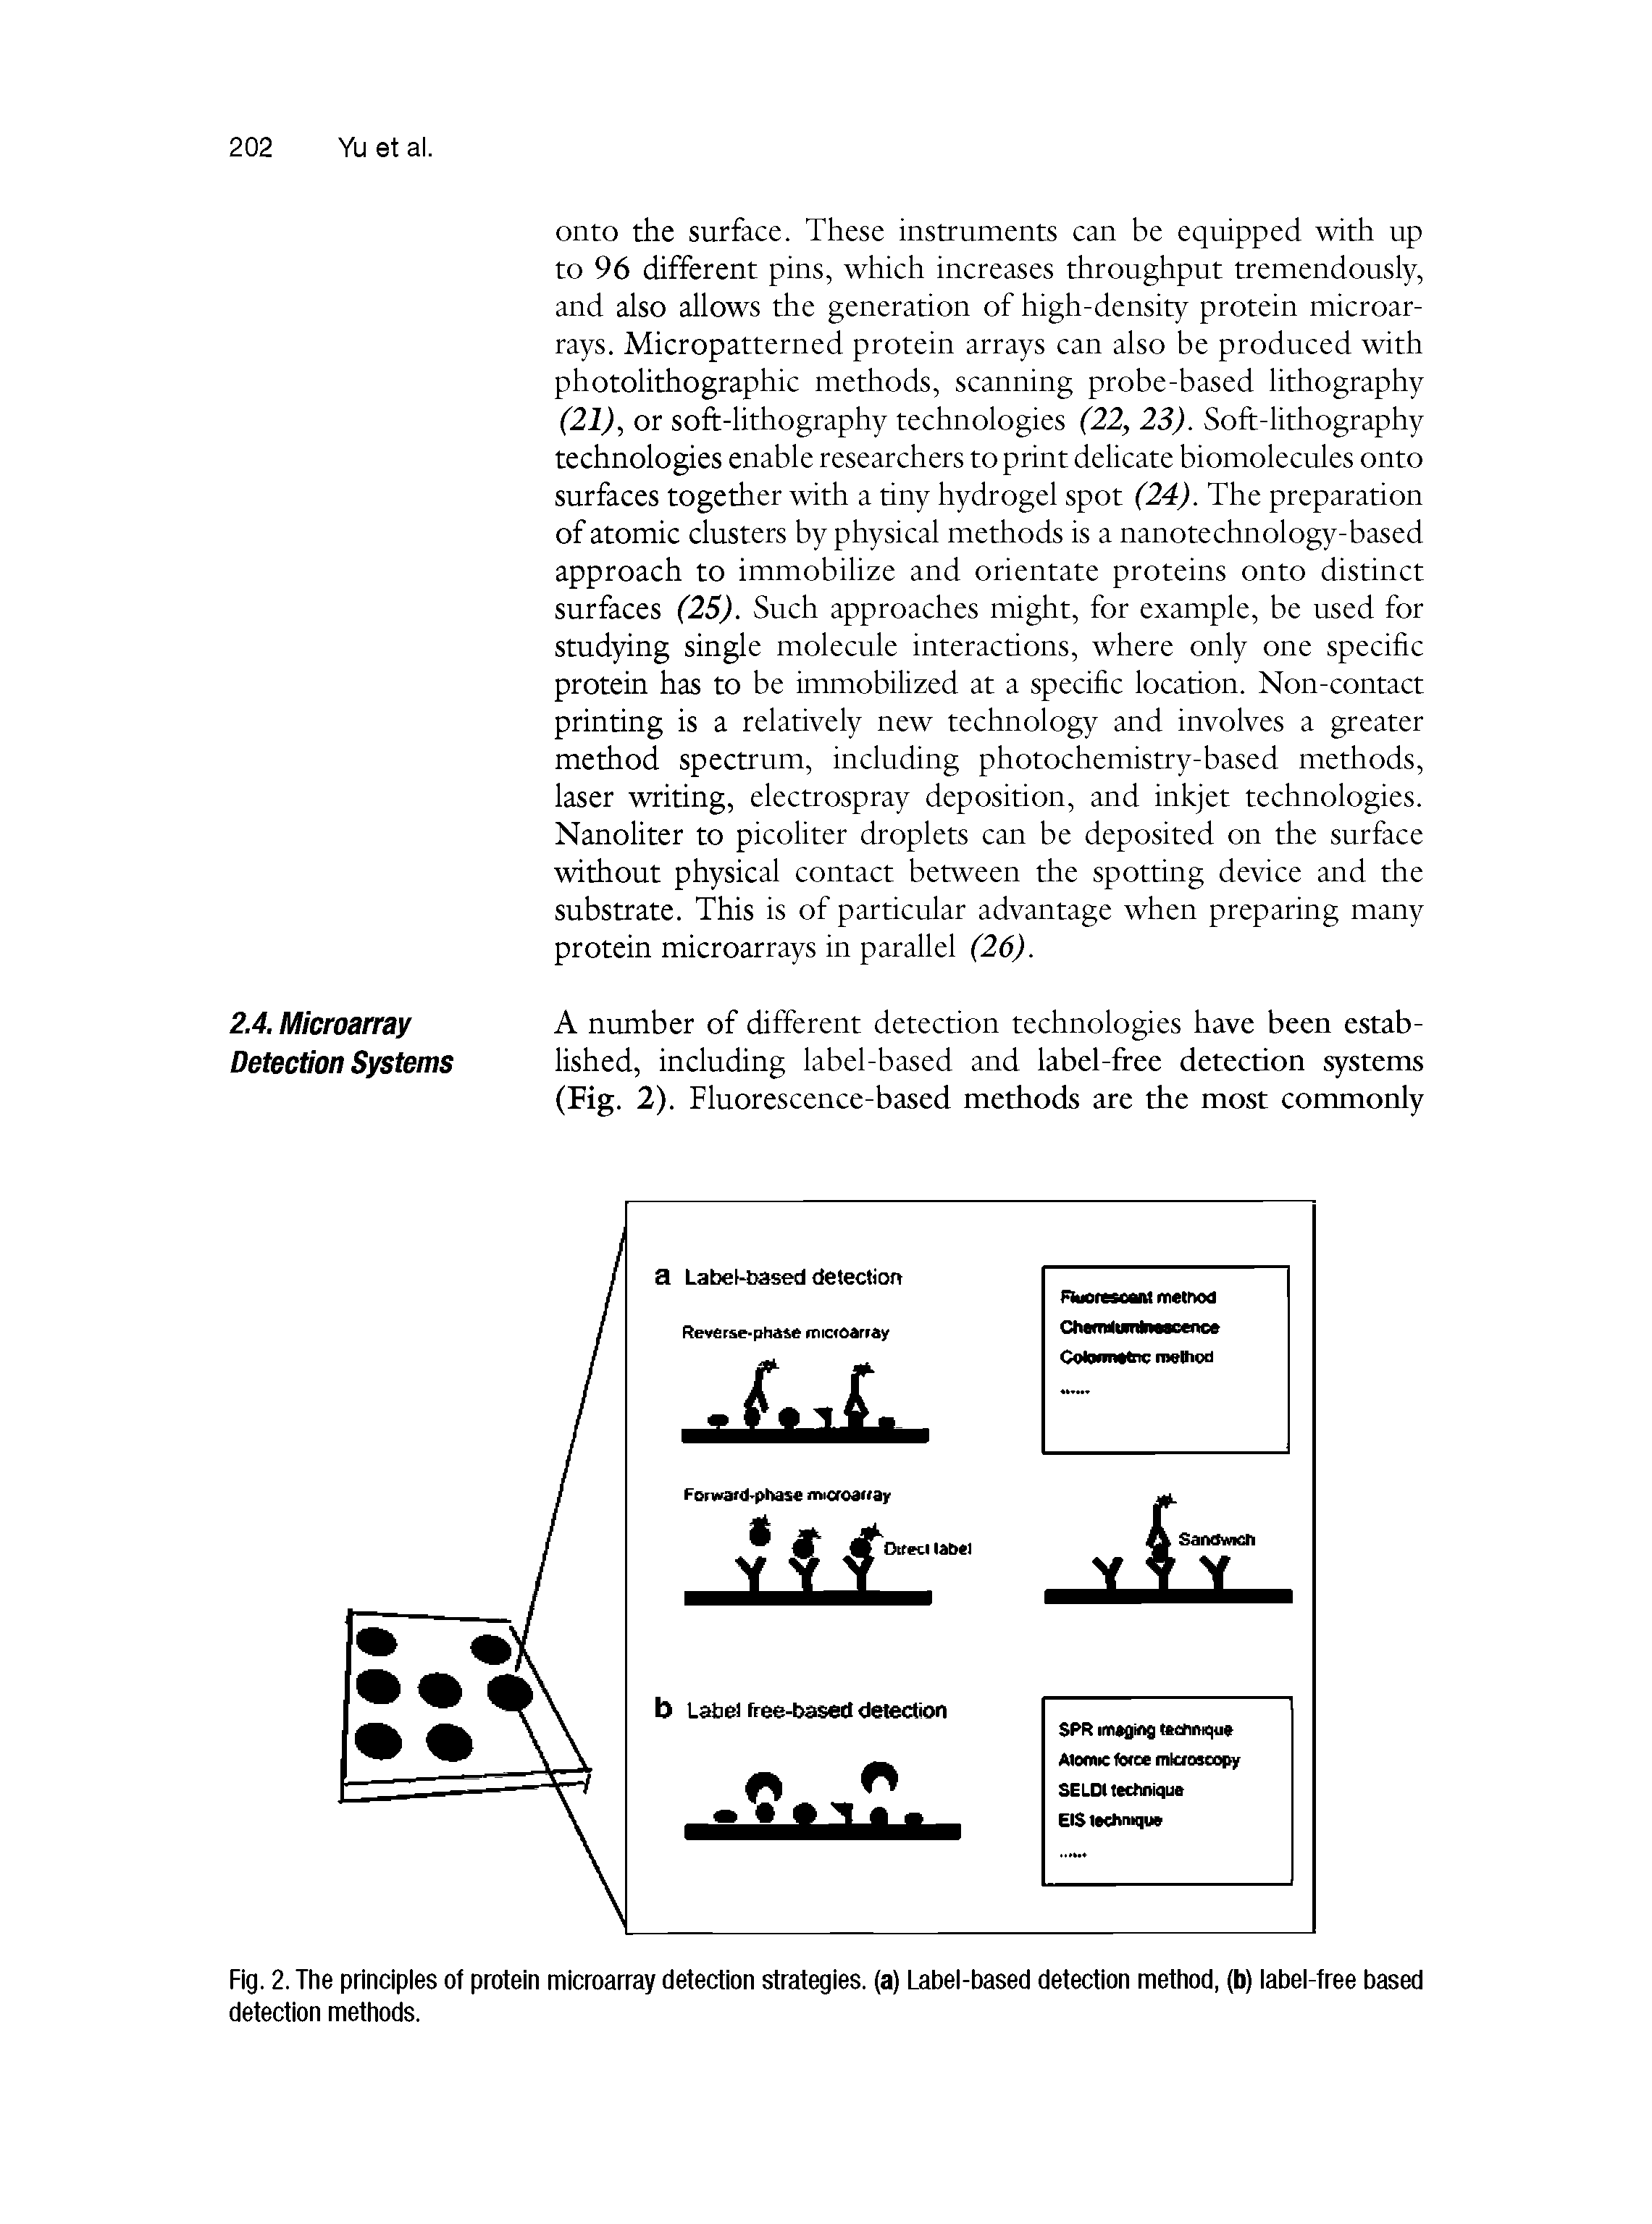 Fig. 2. The principles of protein microarray detection strategies, (a) Label-based detection method, (b) label-free based detection methods.